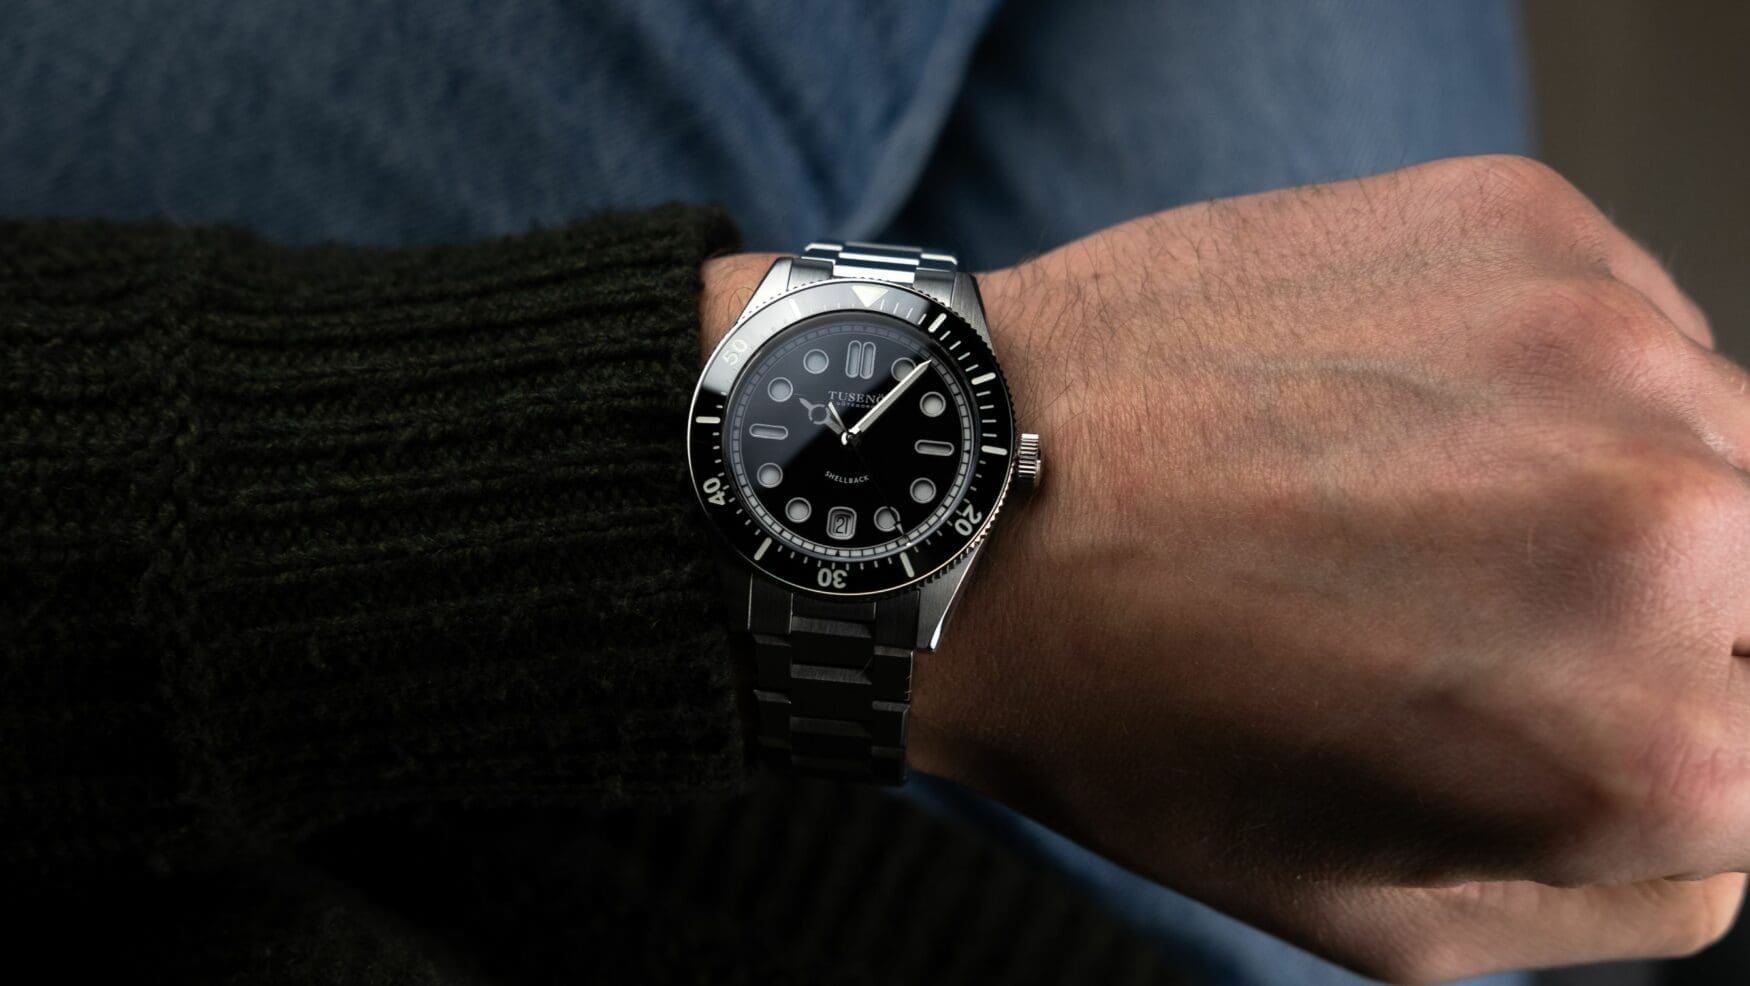 The Tusenö Shellback V2 is a stylish Swedish dive watch that’s a cut above most independent offerings